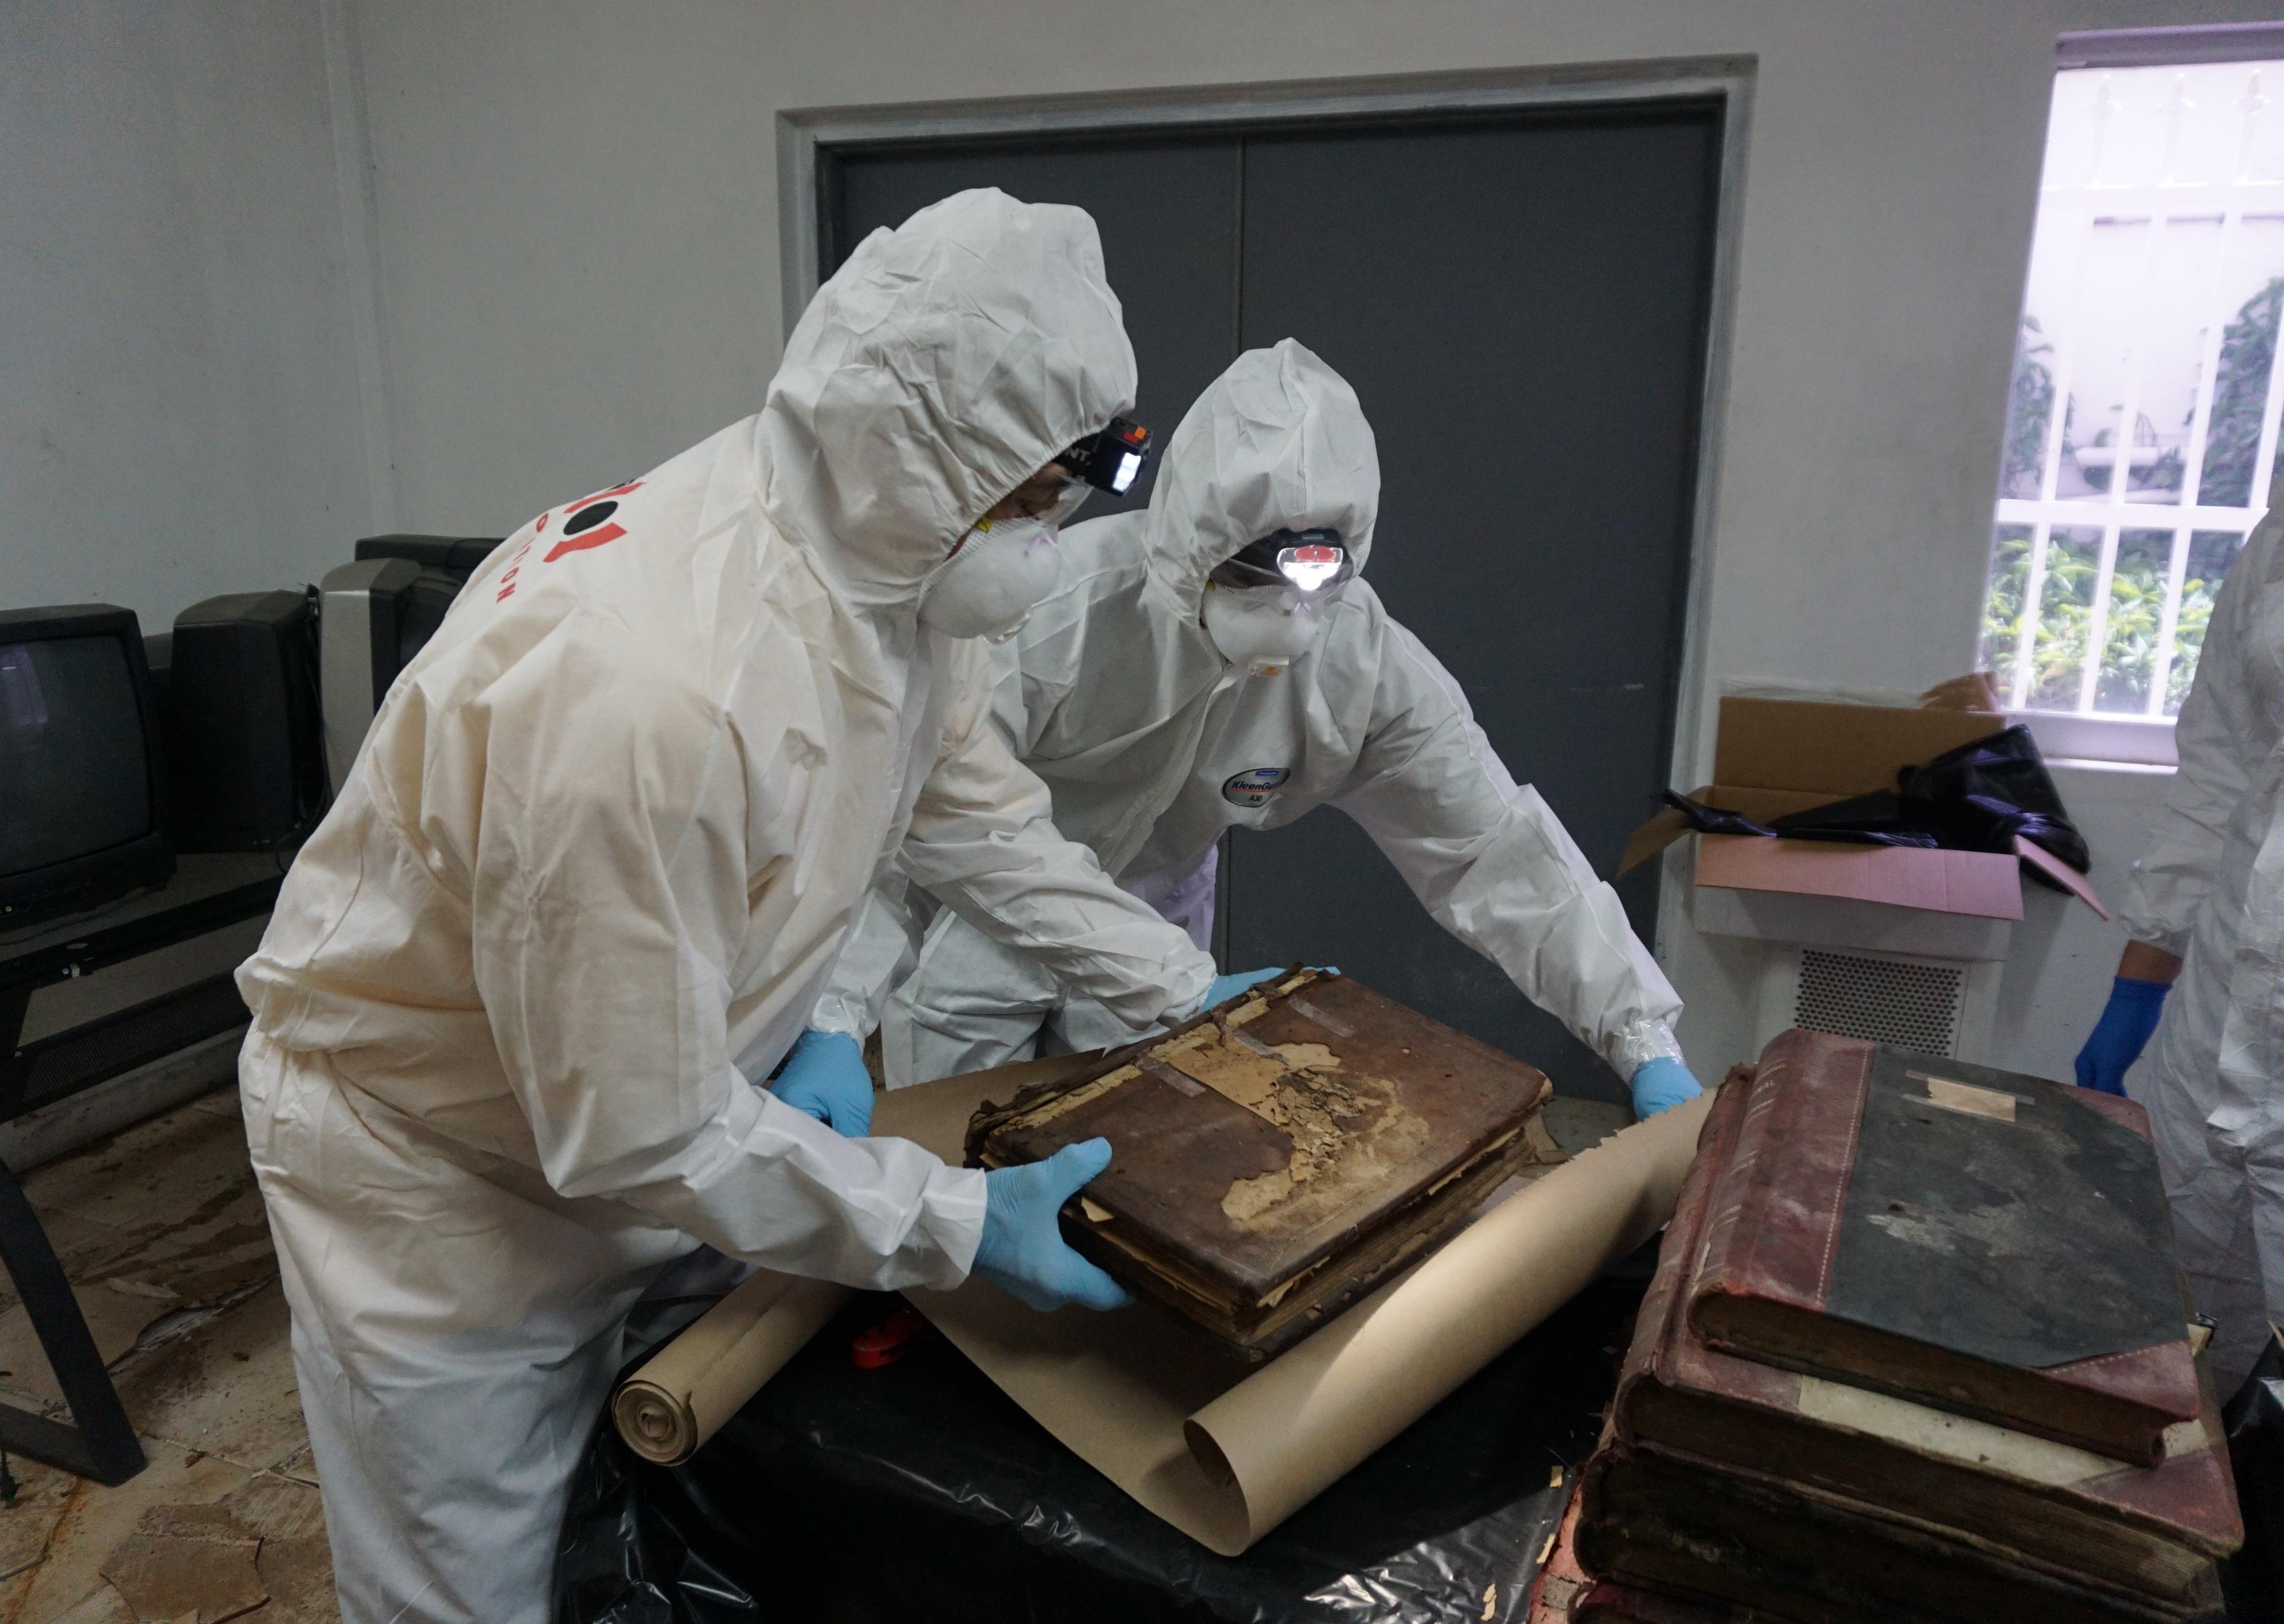 Two people in white hazmat suits handle a damaged historic tome.